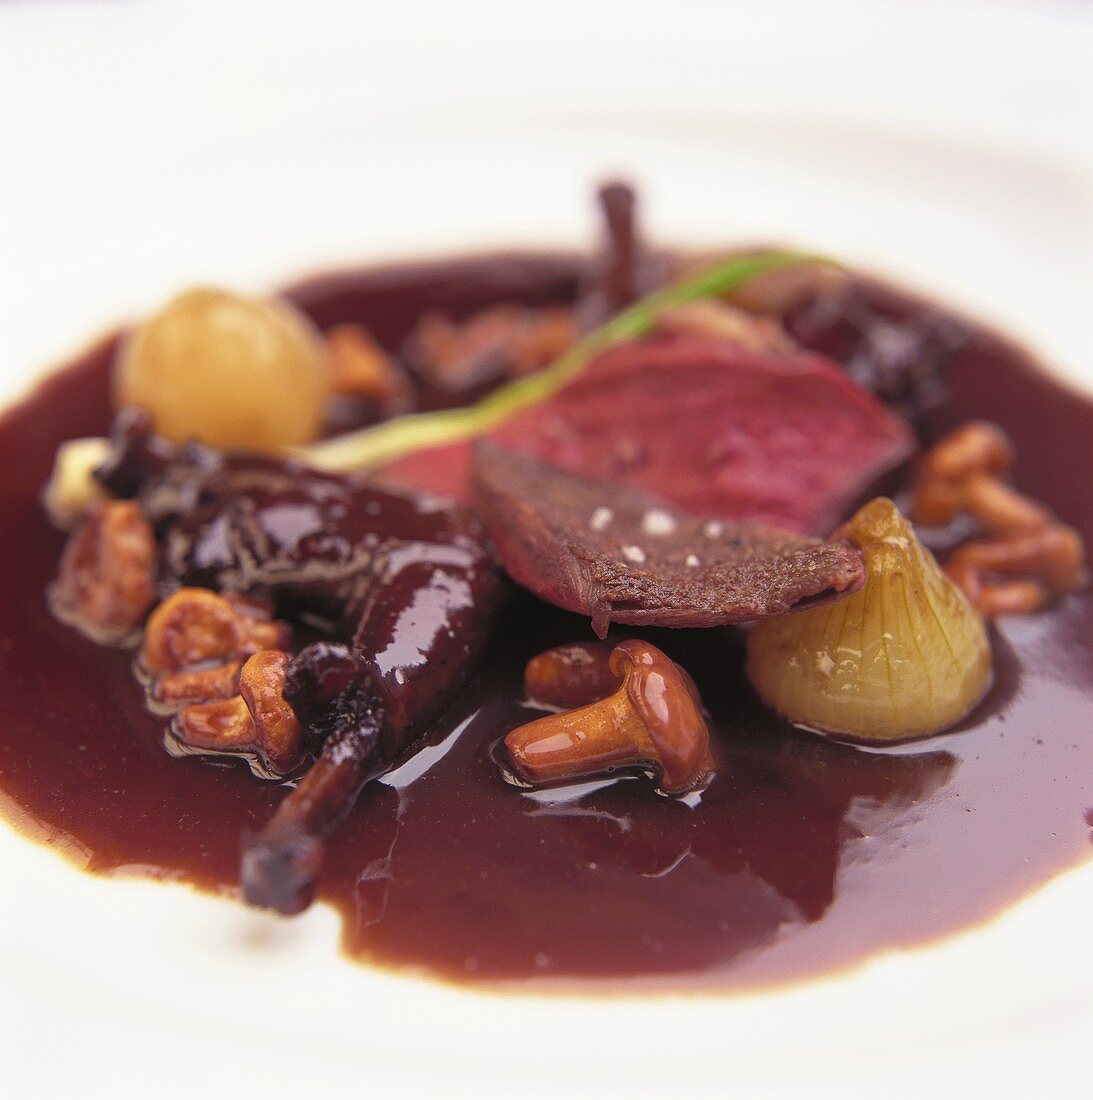 Pink roast pigeon with chanterelles in red wine sauce